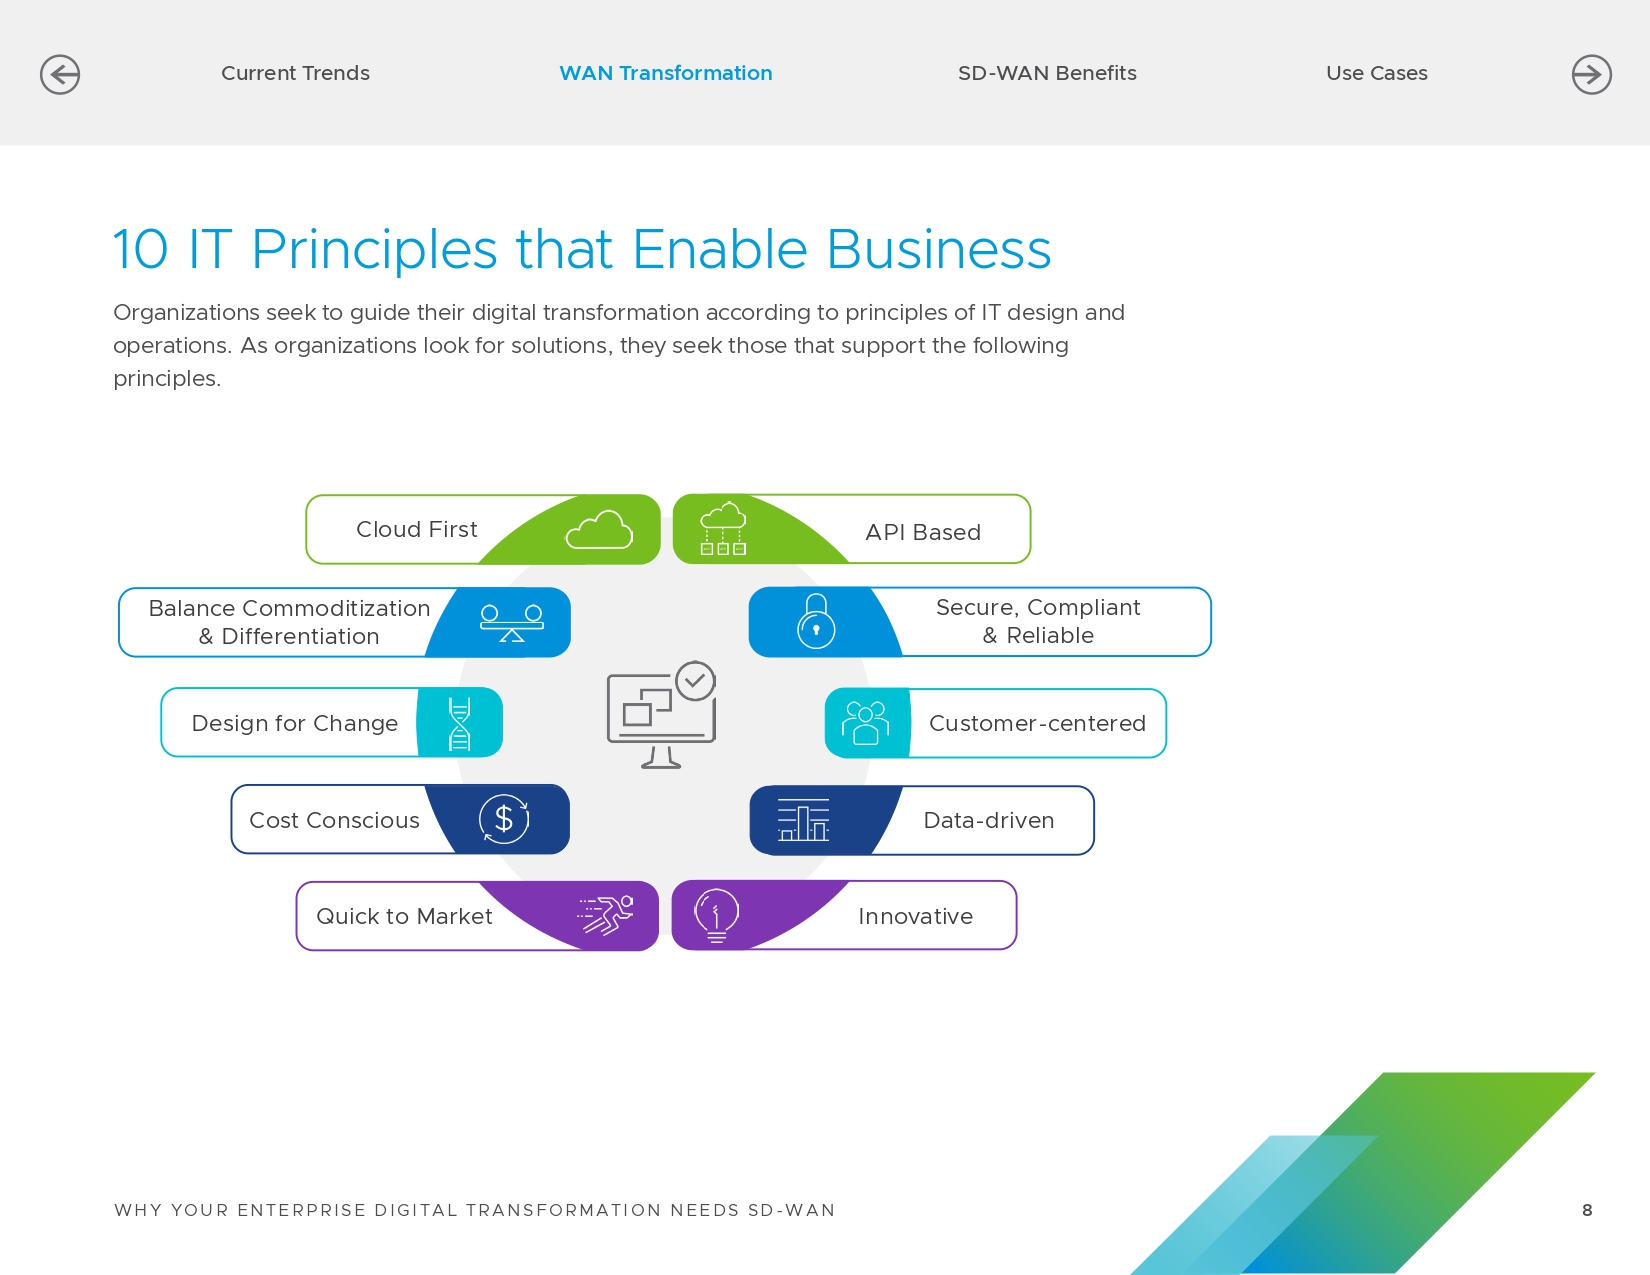 +211431_NEW_Co-branded_CBTS_Why_Your_Enterprise_Digital_Transformation_Needs_SD-WAN-e-book_page-0008